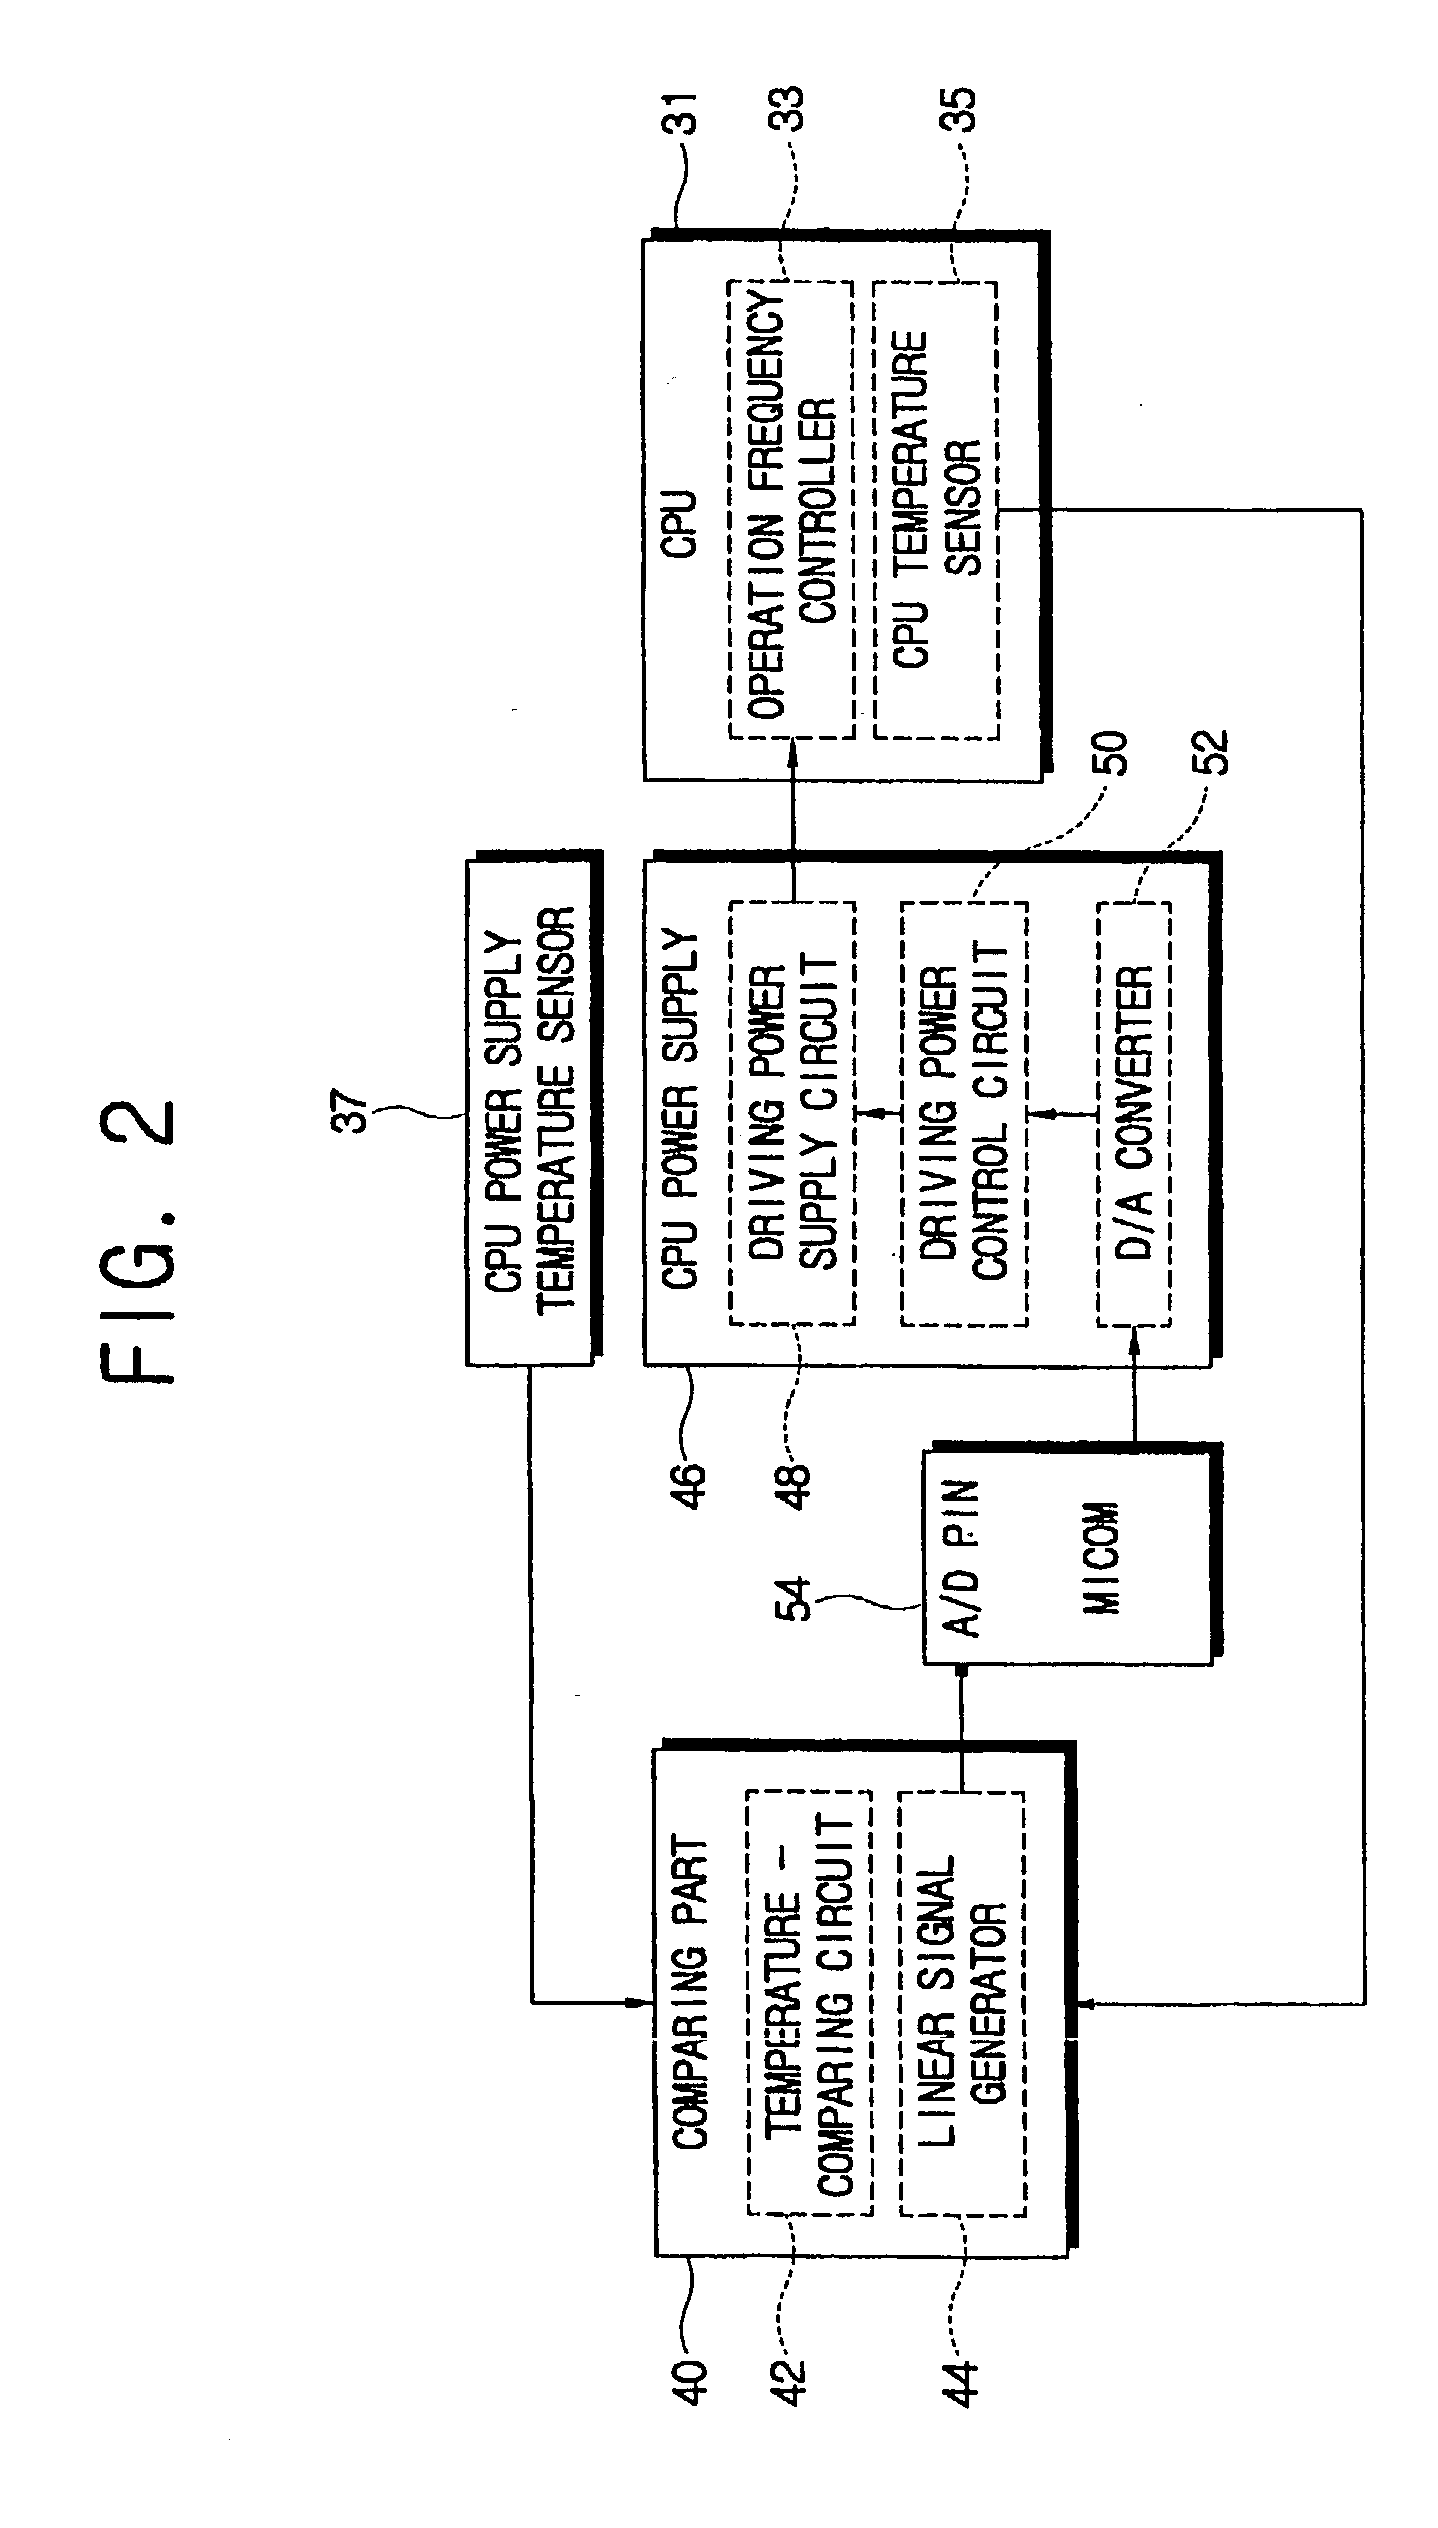 System, controller, software and method for protecting against overheating of a CPU